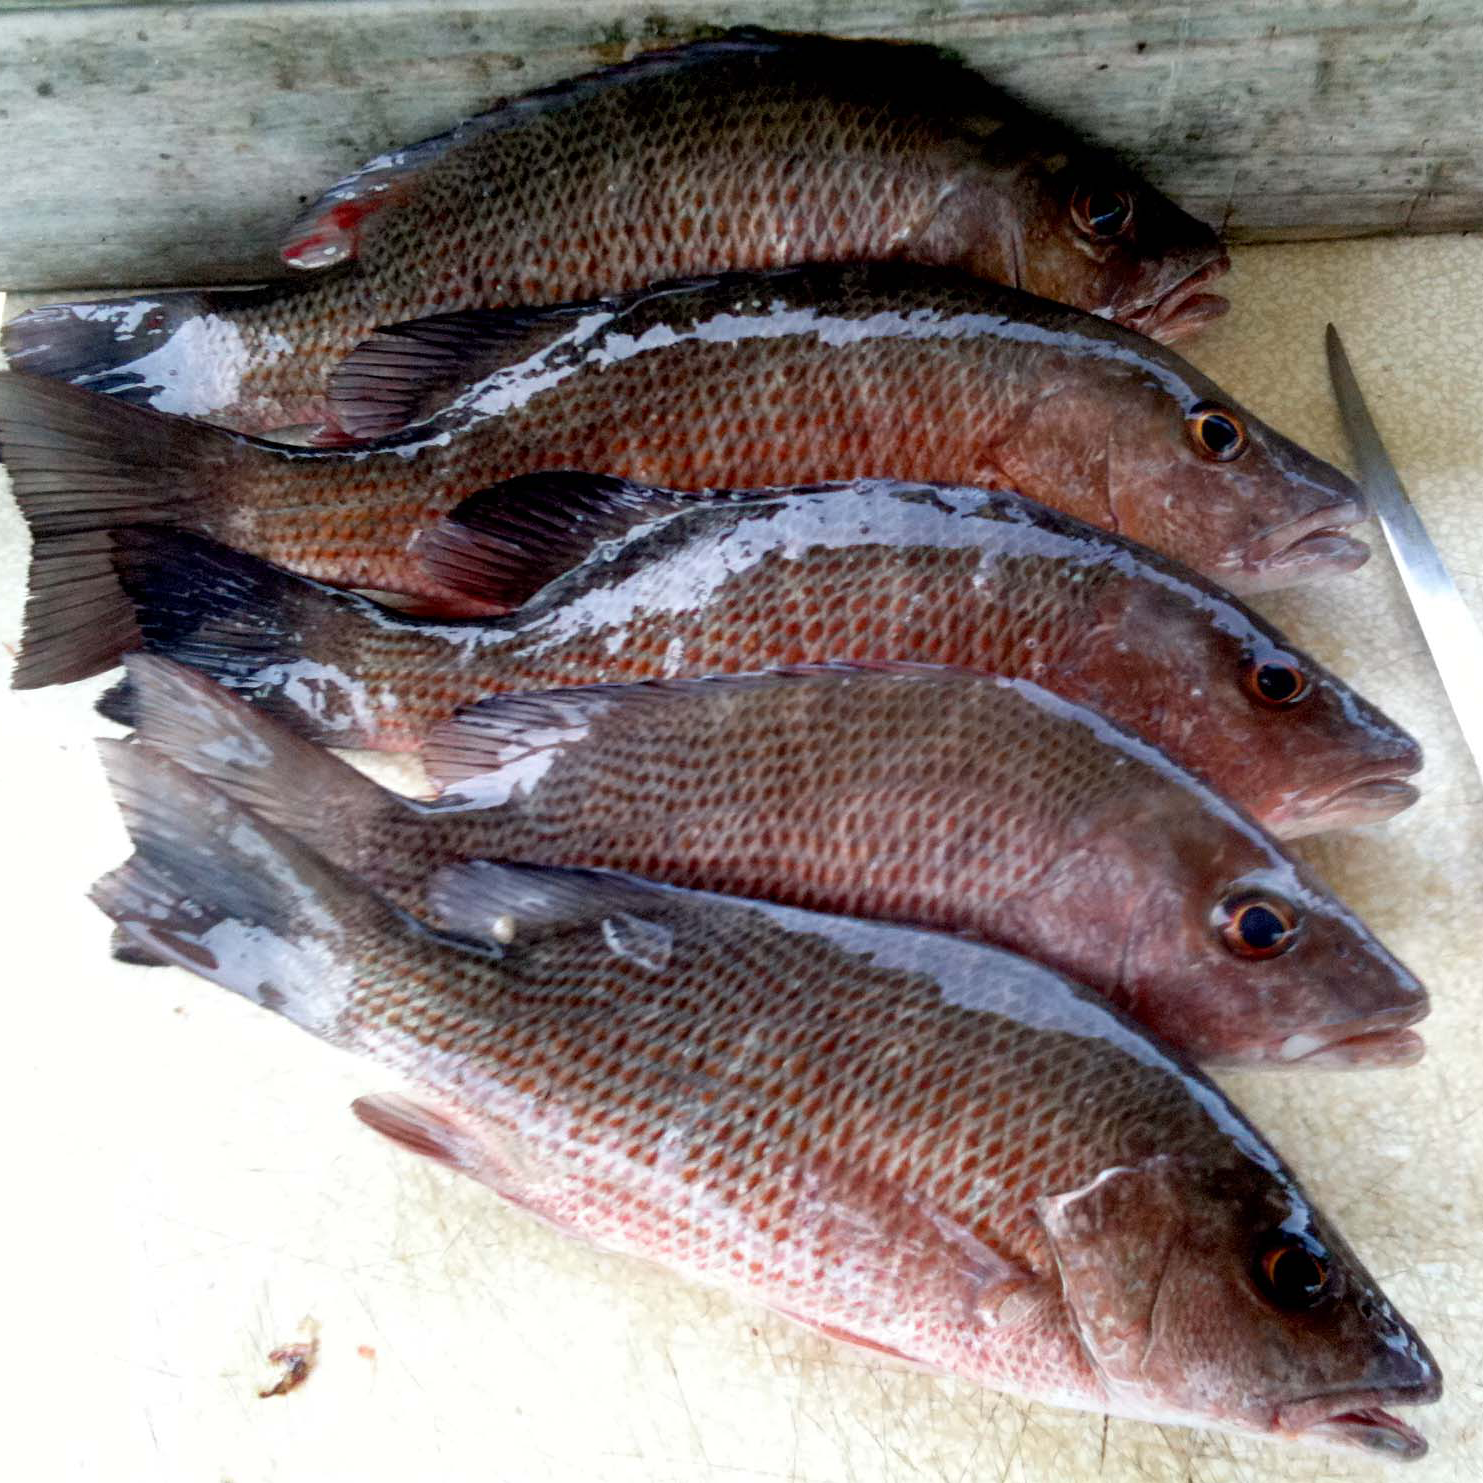 Limit of Mangrove Snapper